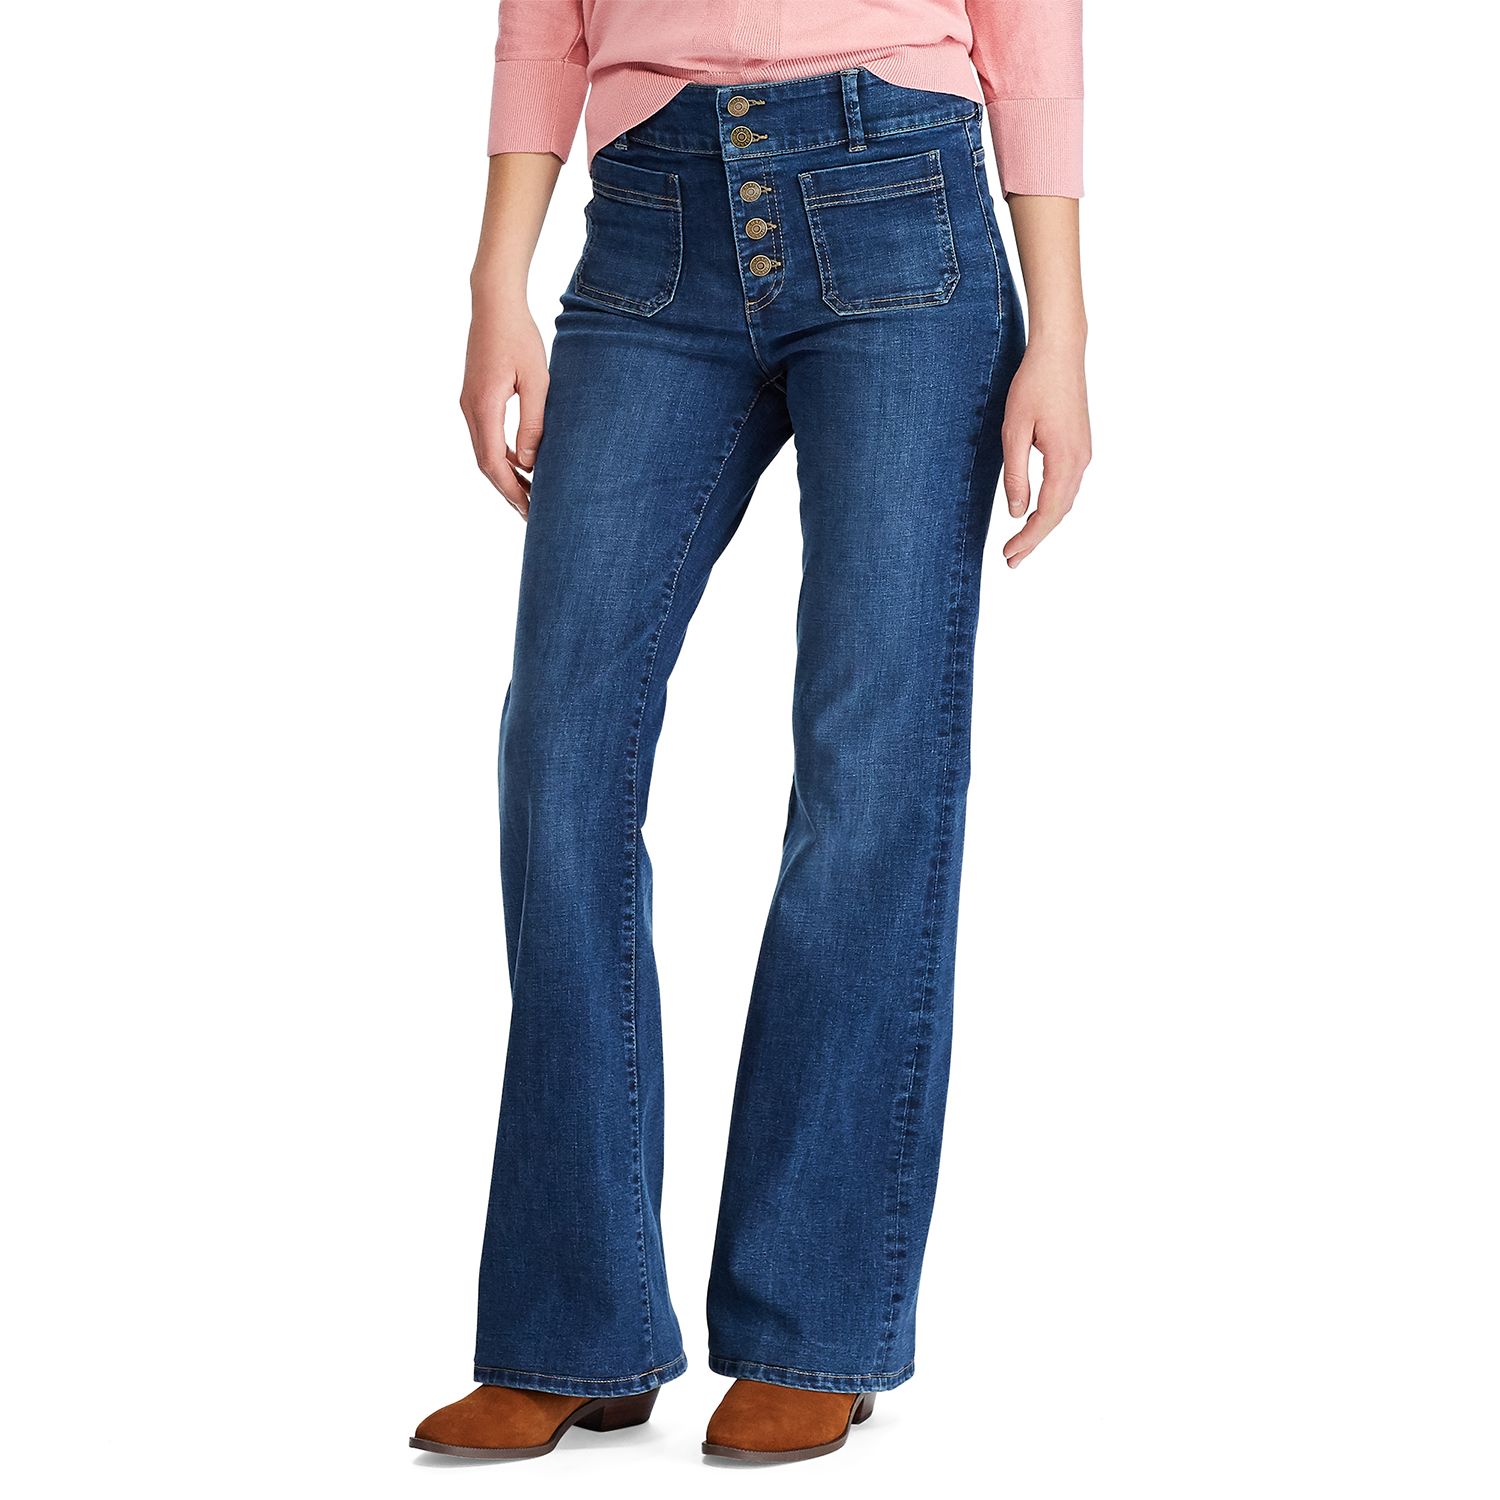 button jeans womens